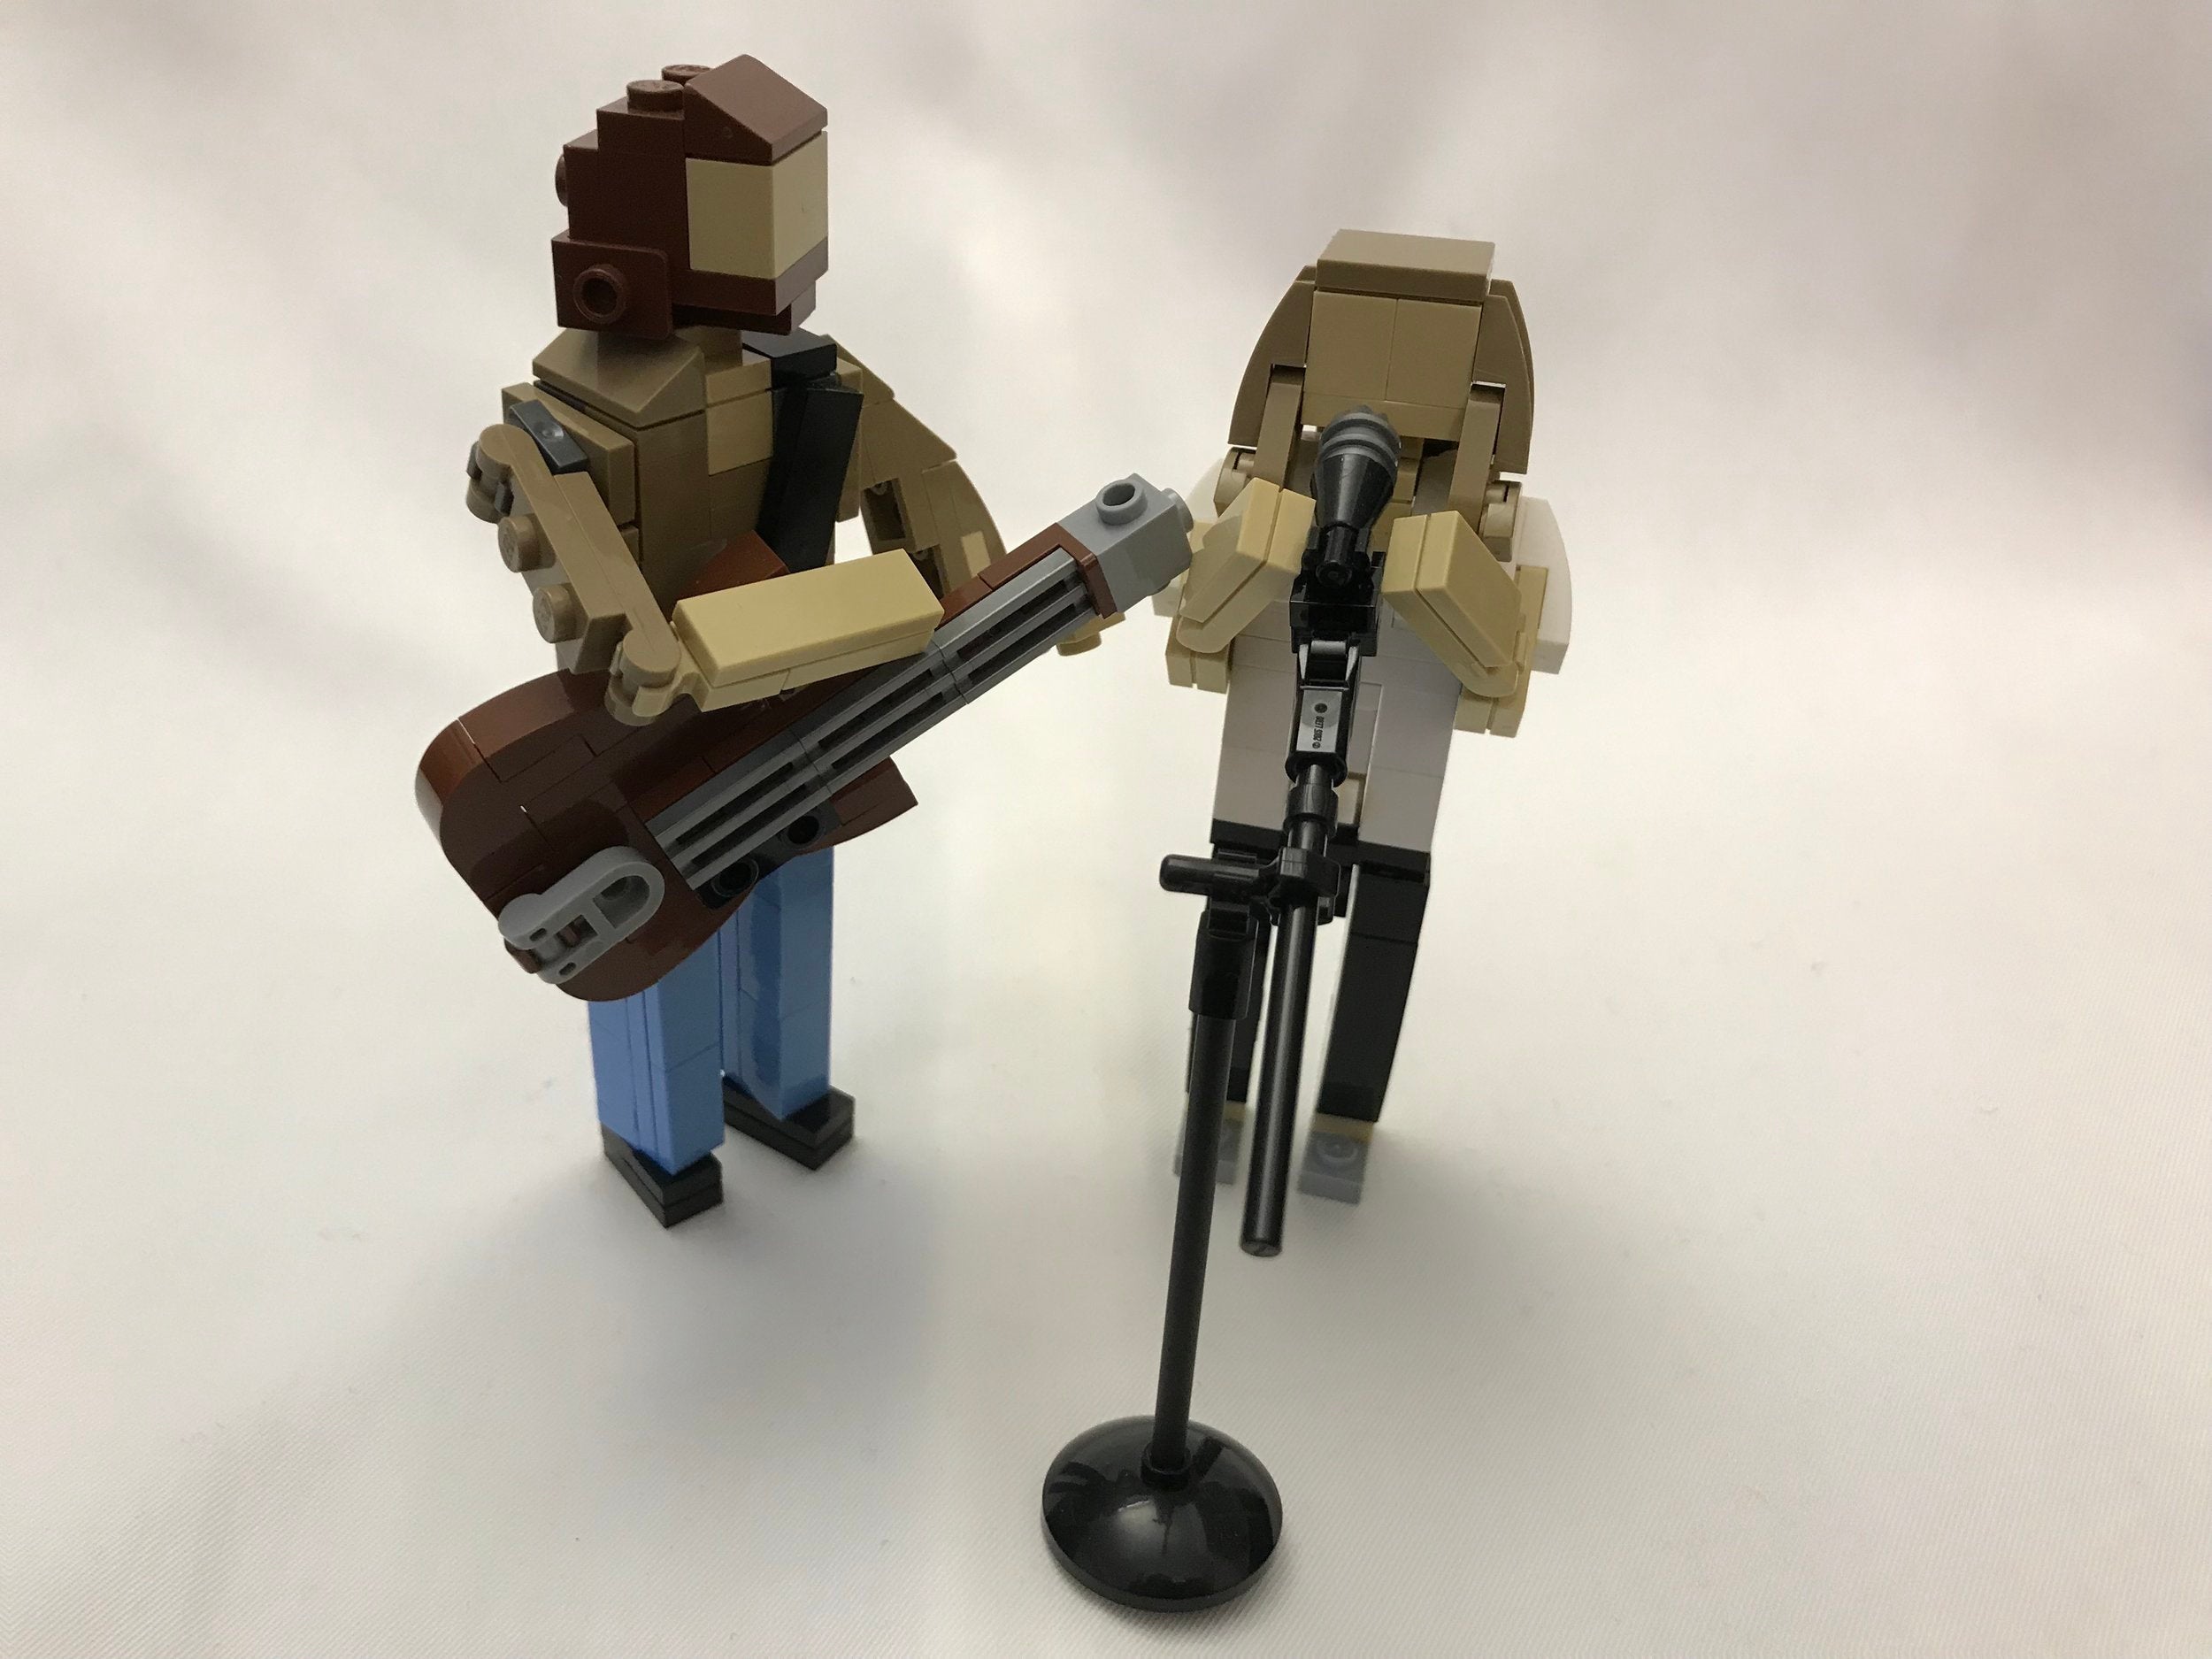 Lego scene of Bradley Cooper and Lady Gaga as their characters from the film A Star is Born (2018)